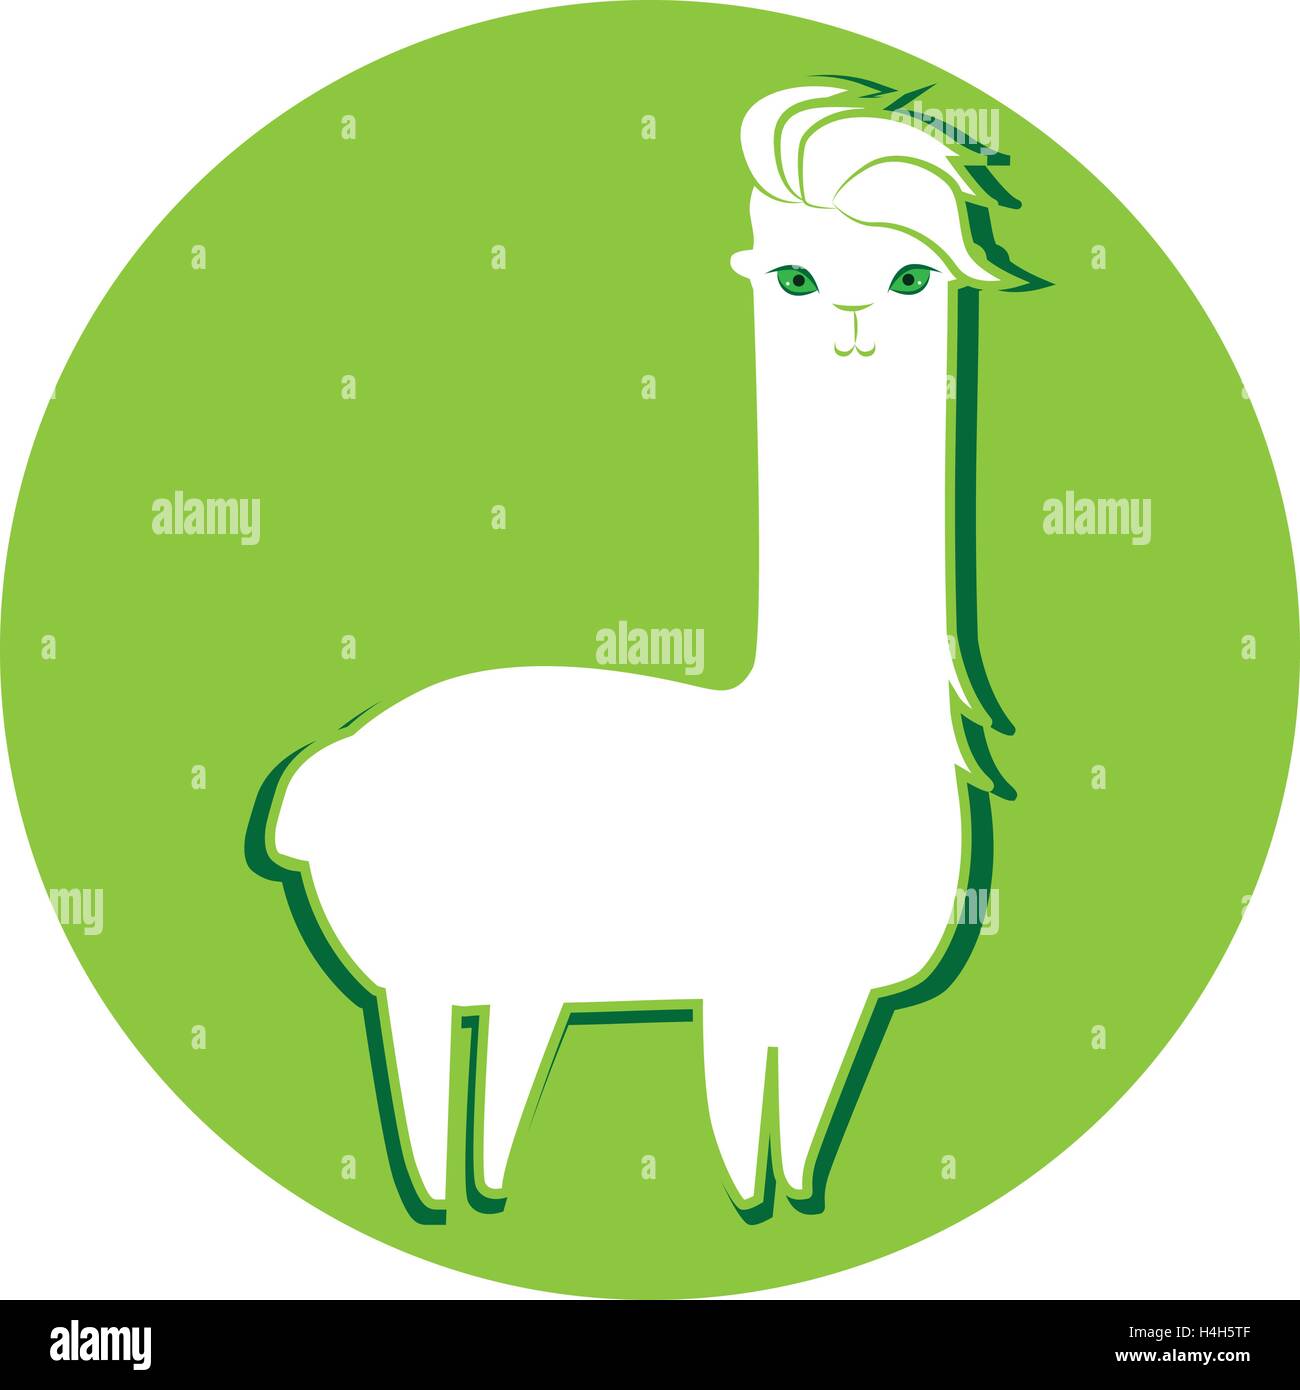 Lama and Lama Yarn Concept Design. EPS 8 supported. Stock Vector